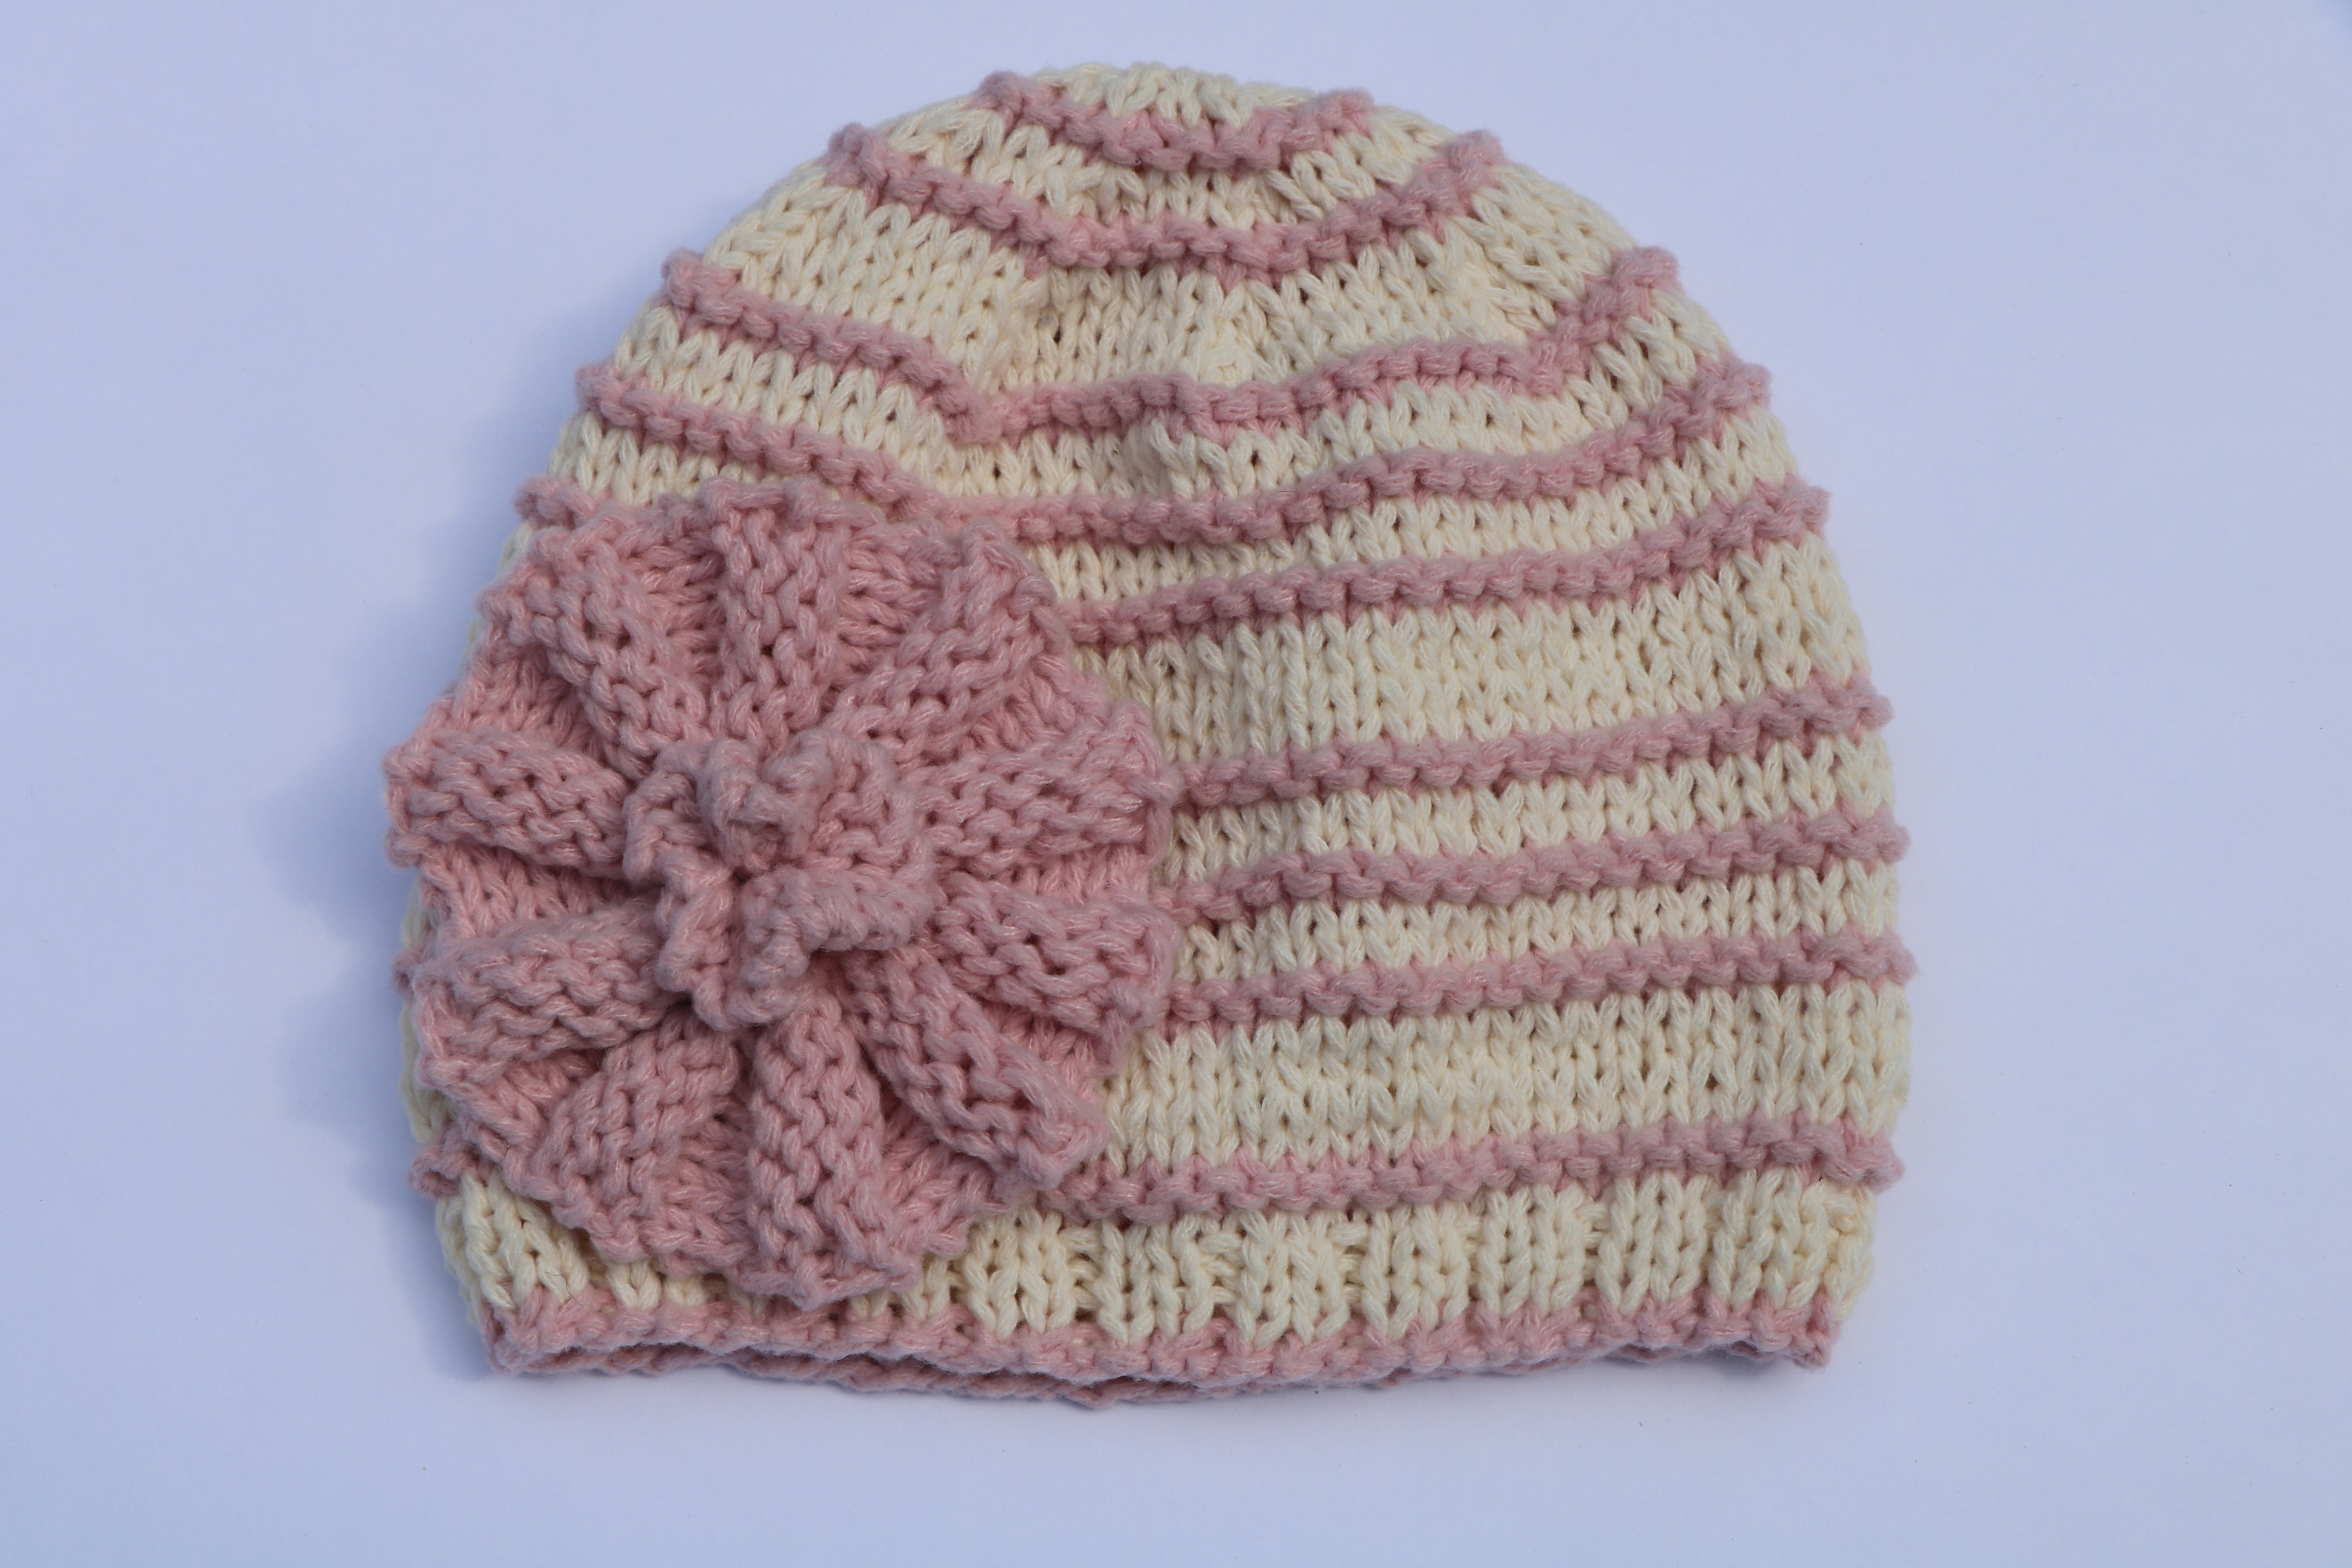 Free Knitting Patterns For Babies Hats Best Knitting Patterns For Ba Clothes Accessories Instructions